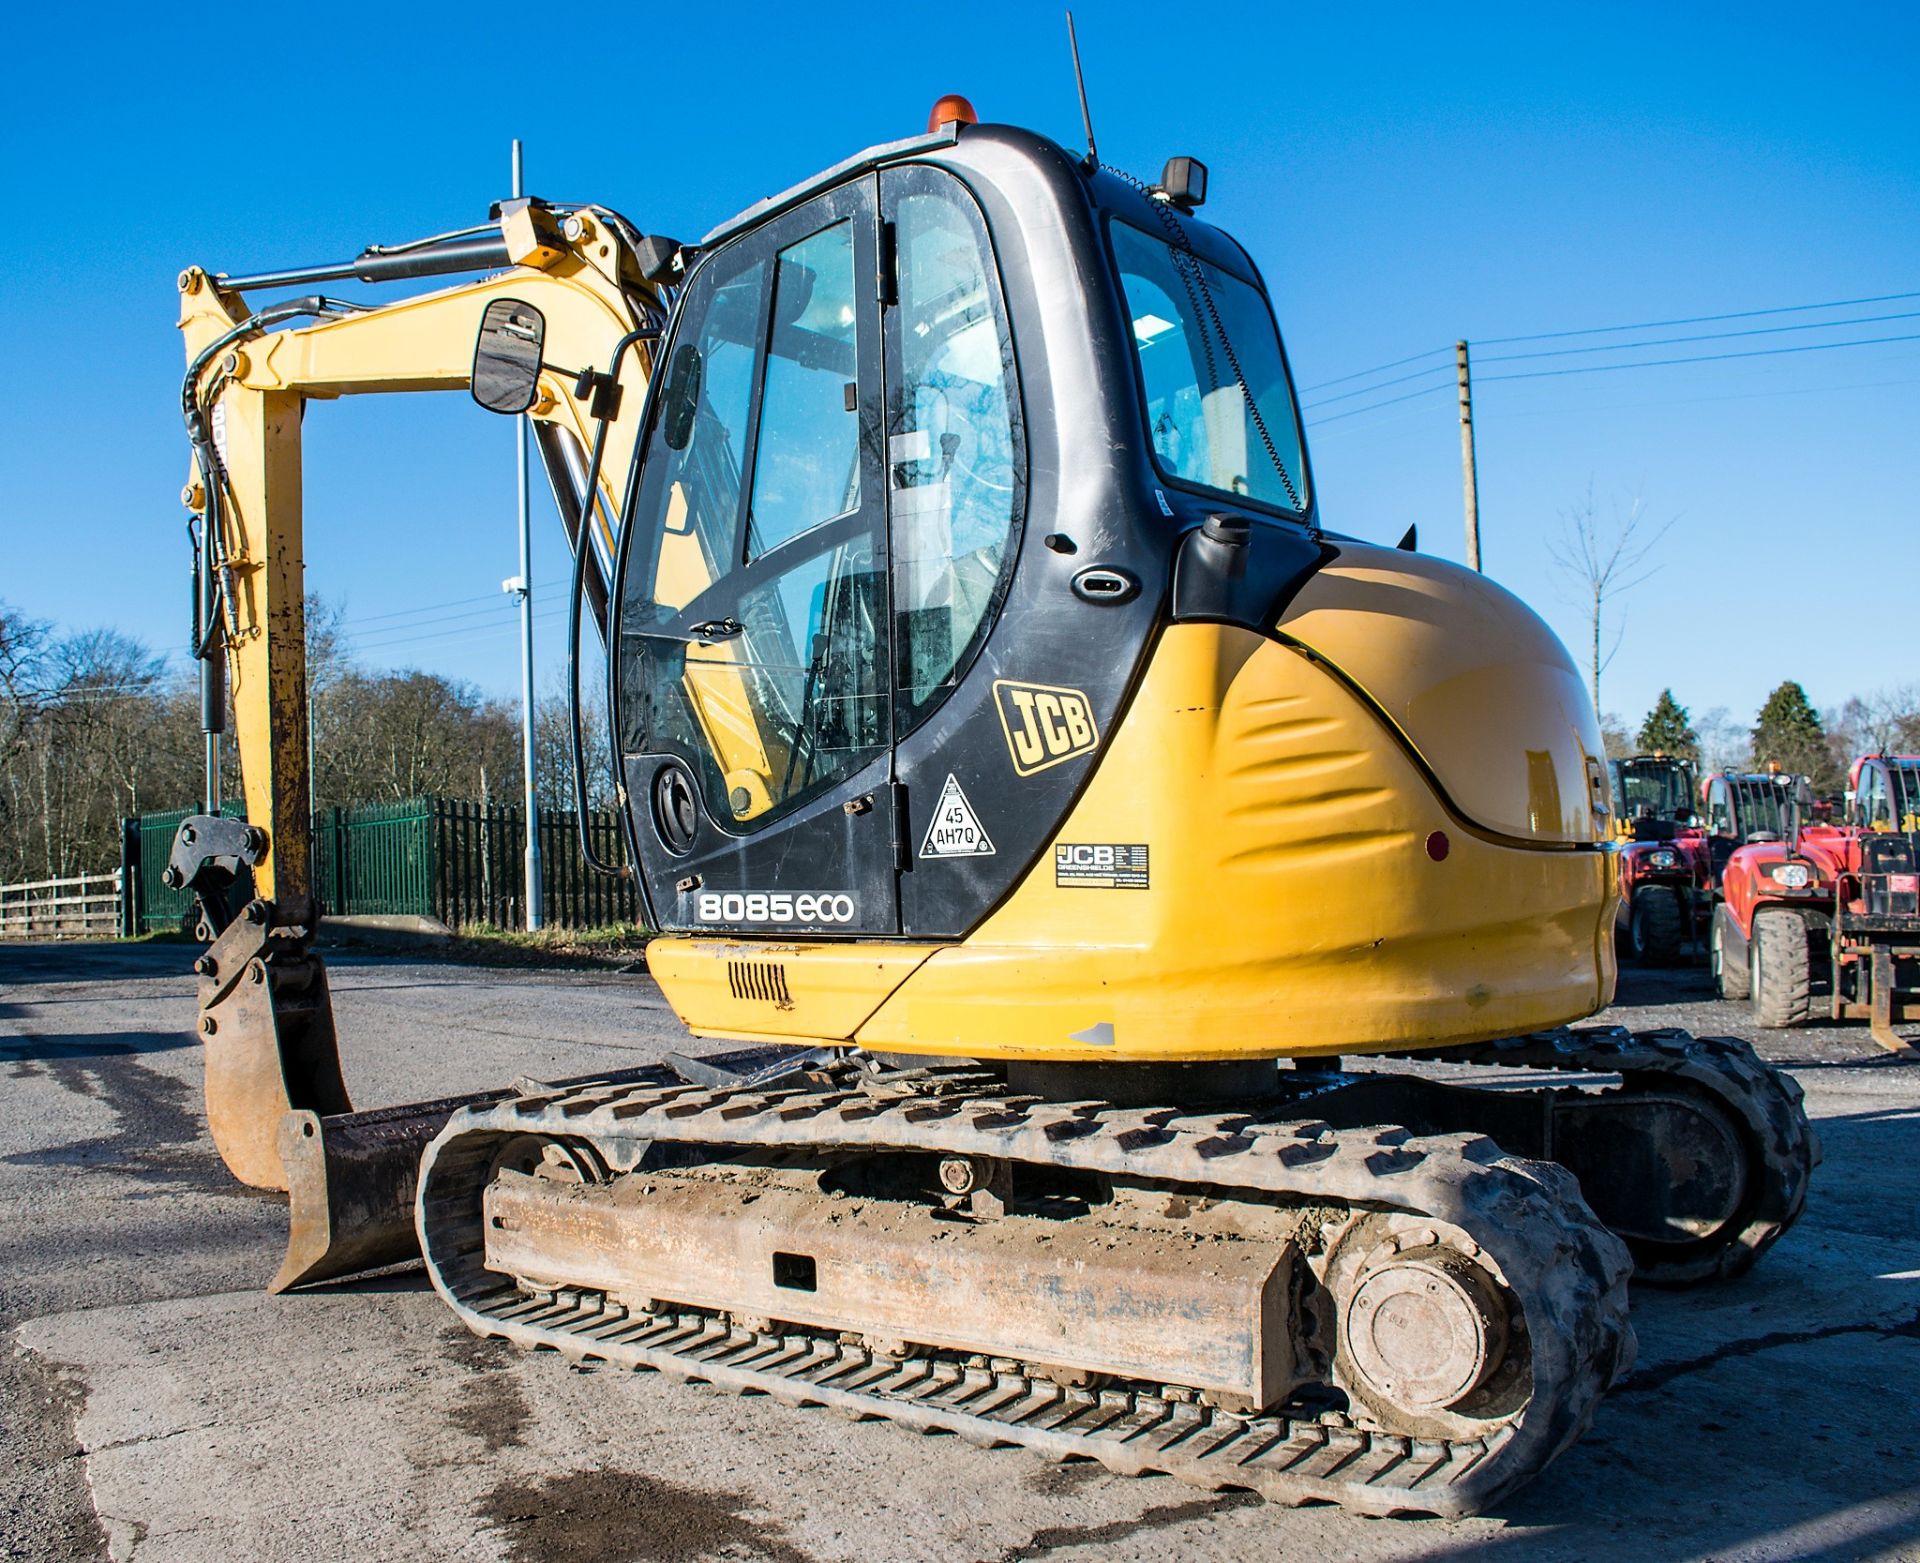 JCB 8085 ECO 8.5 tonne rubber tracked excavator Year: 2013 S/N: 1073095 Recorded Hours: 2431 - Image 3 of 12